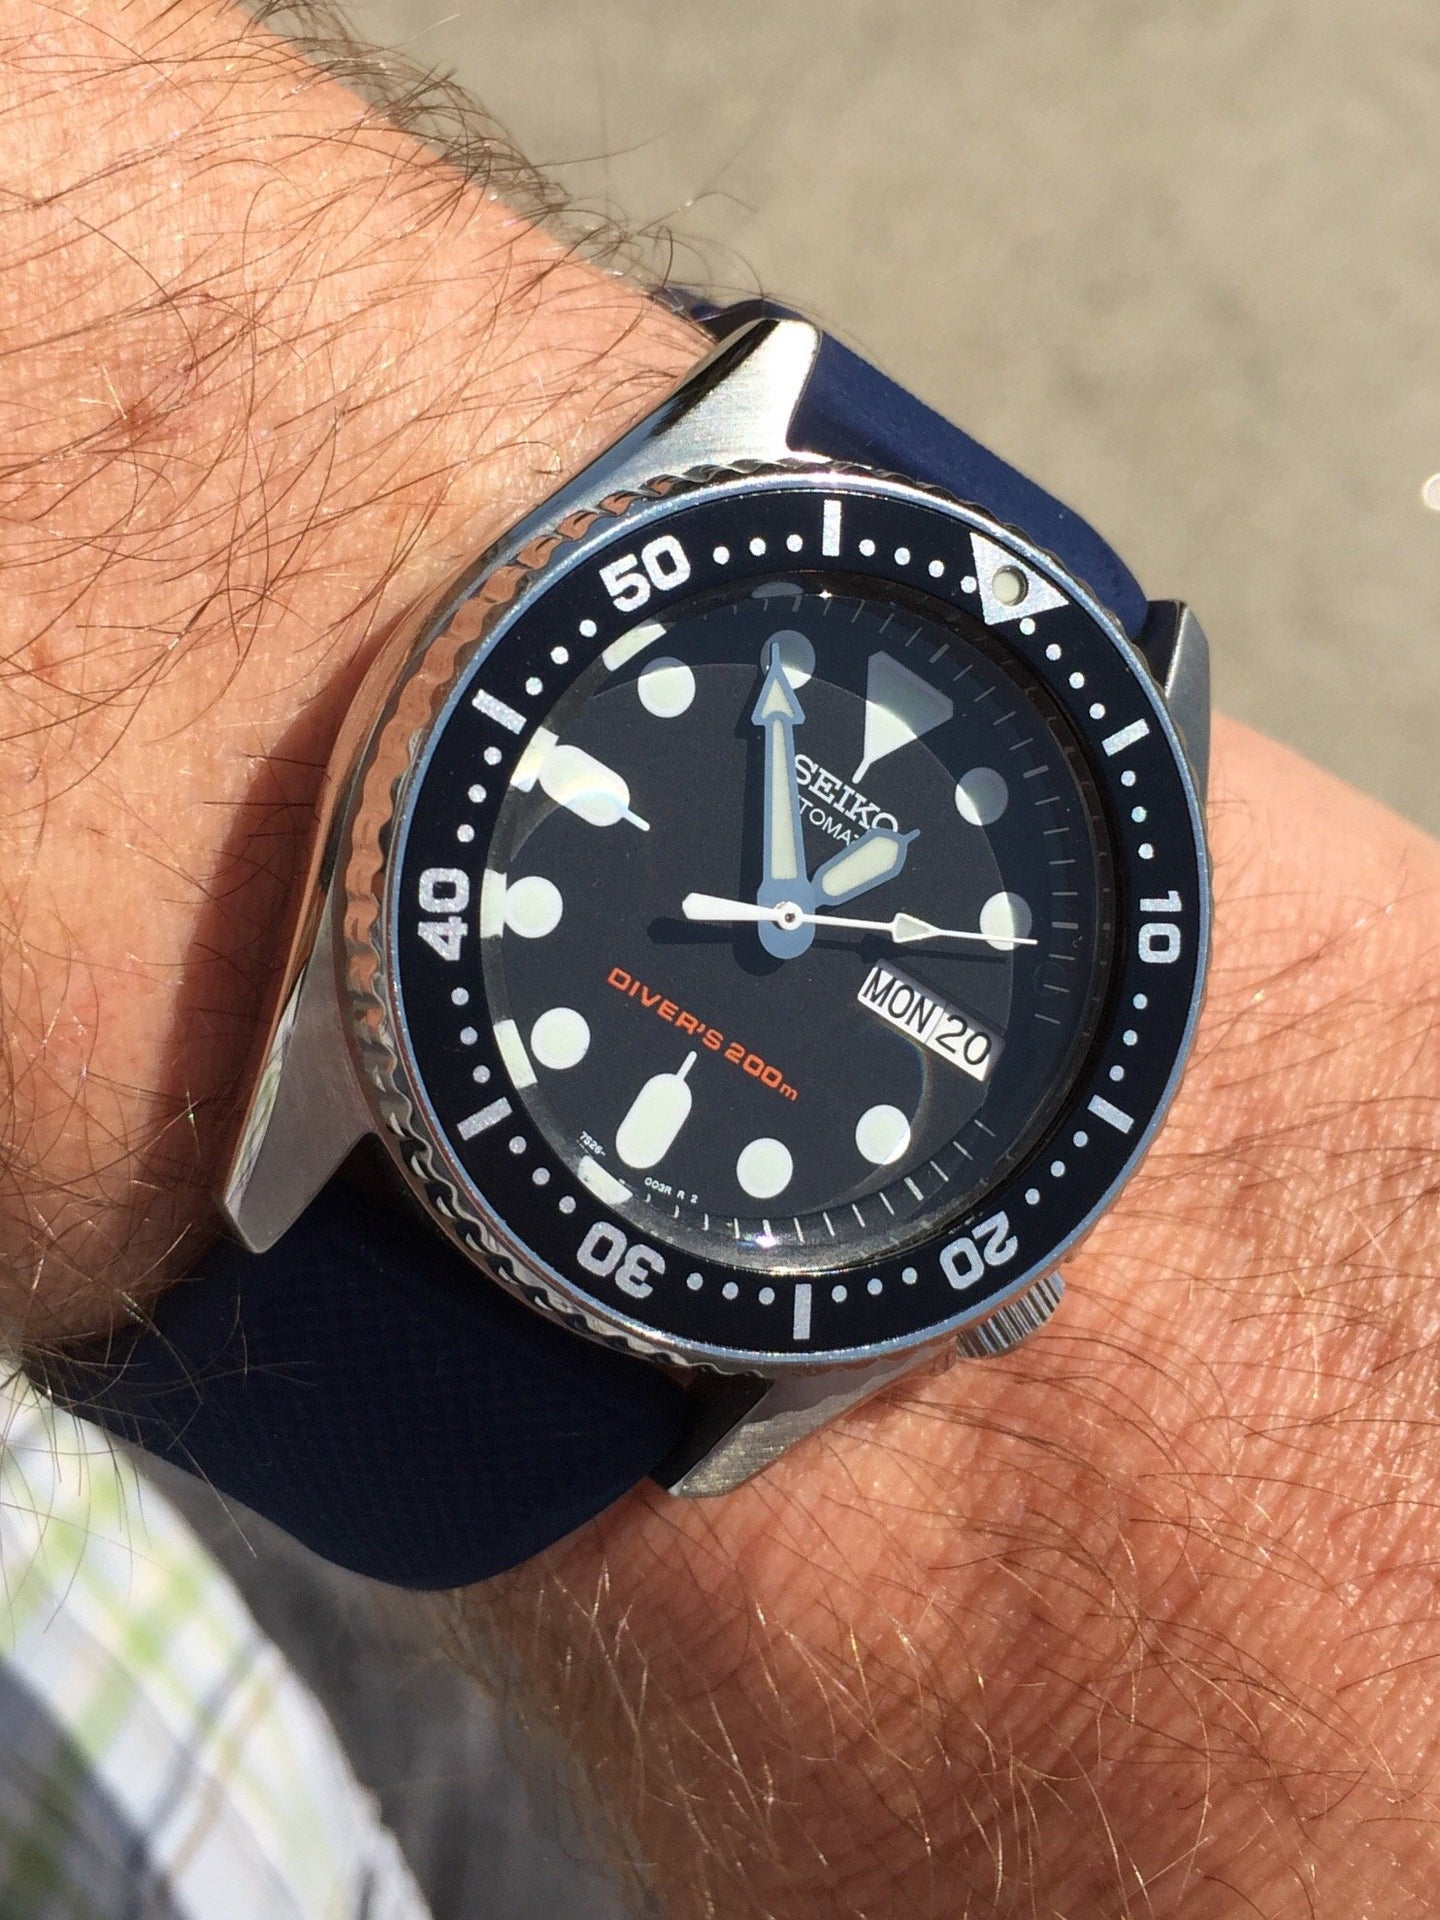 Seiko SKX013 - Where Are They? | WatchUSeek Watch Forums